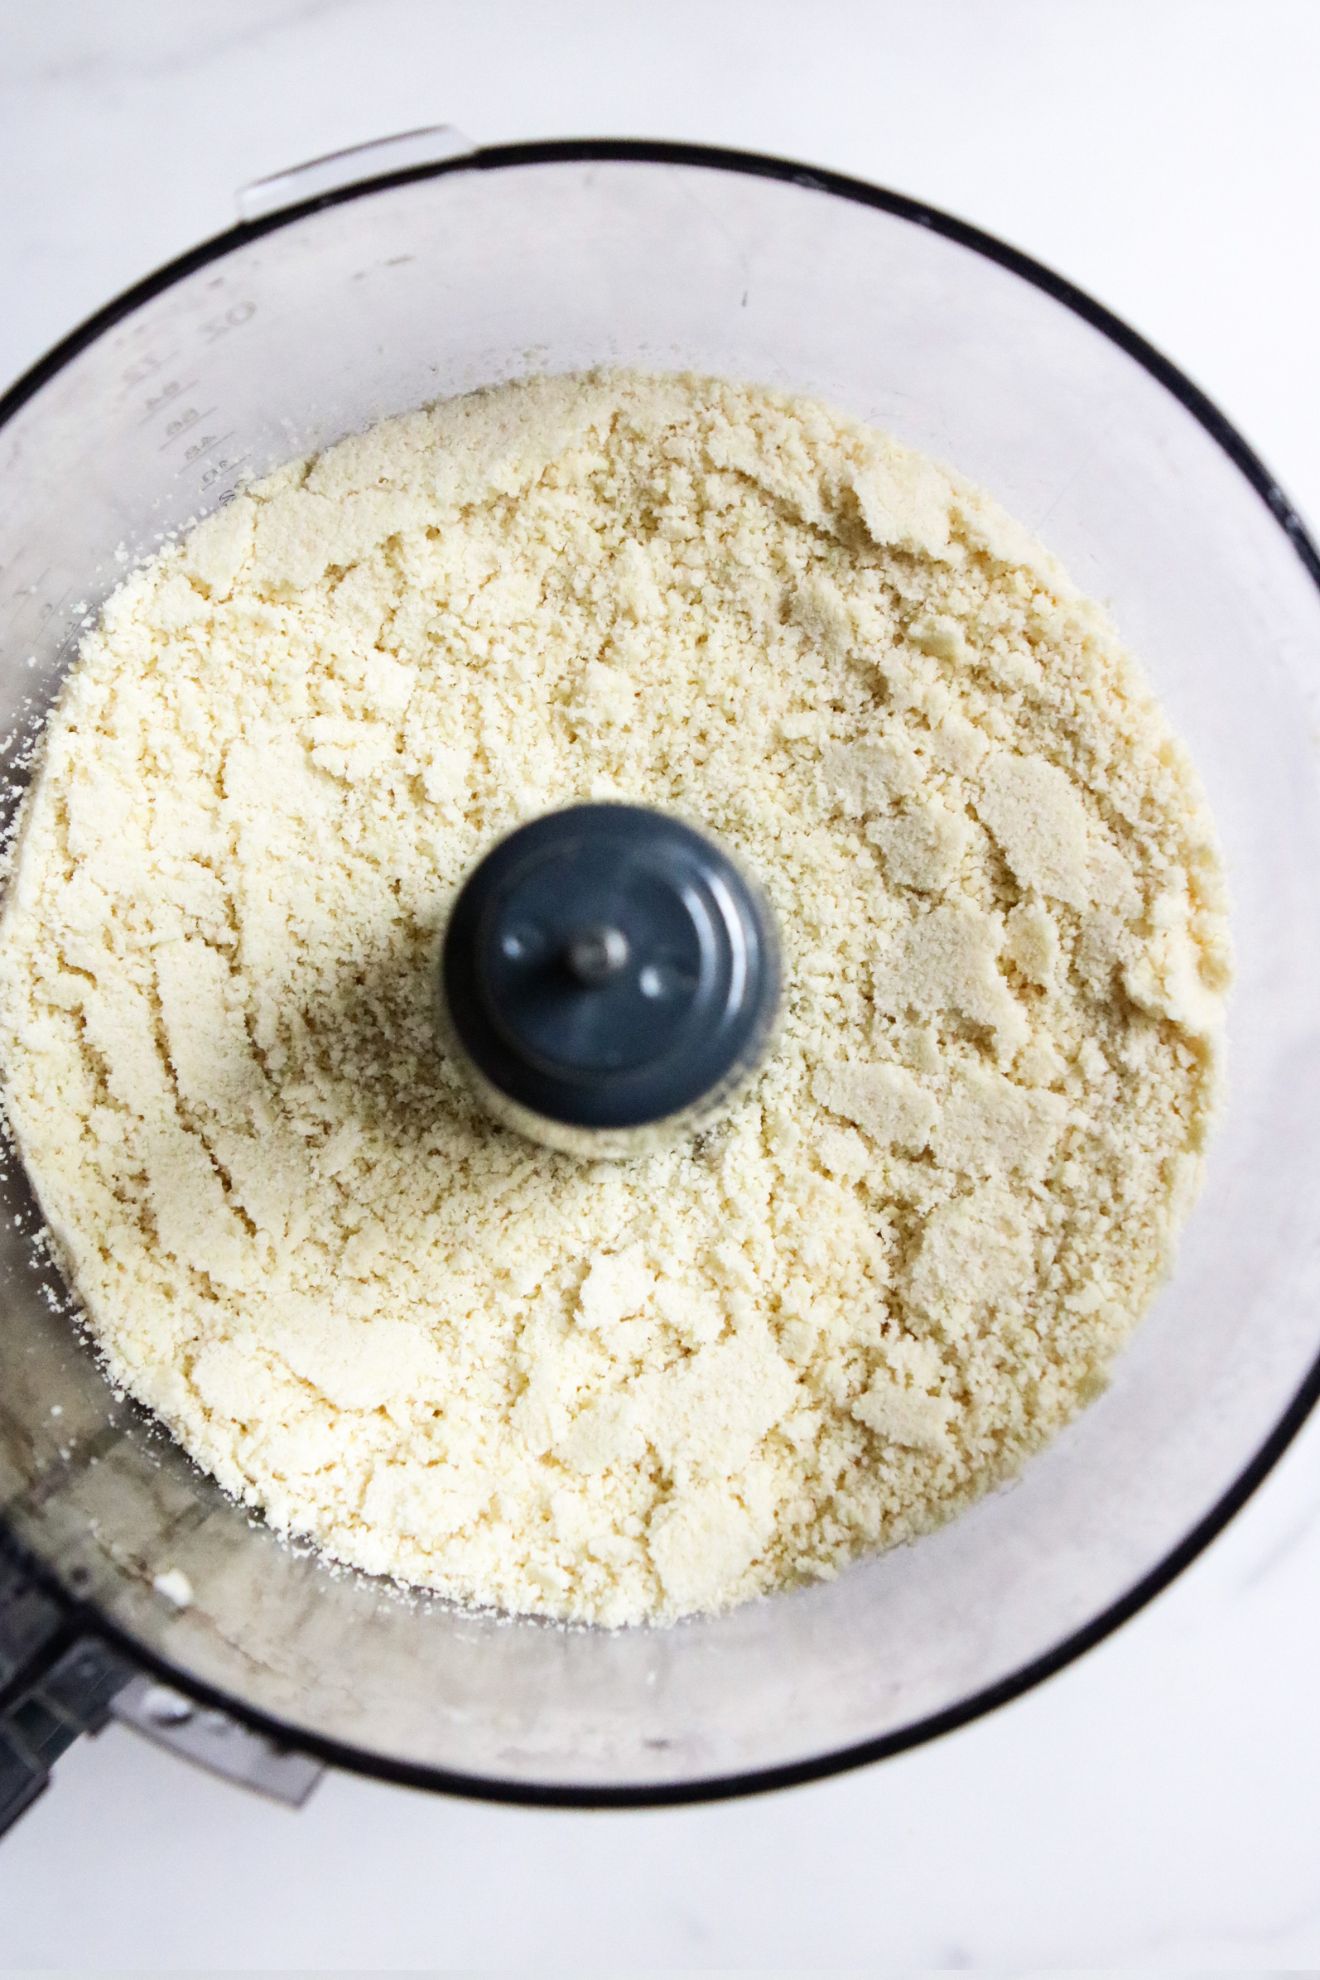 This is an overhead vertical image of a food processor with blanched almond flour in it. The food processor sits on a white counter.